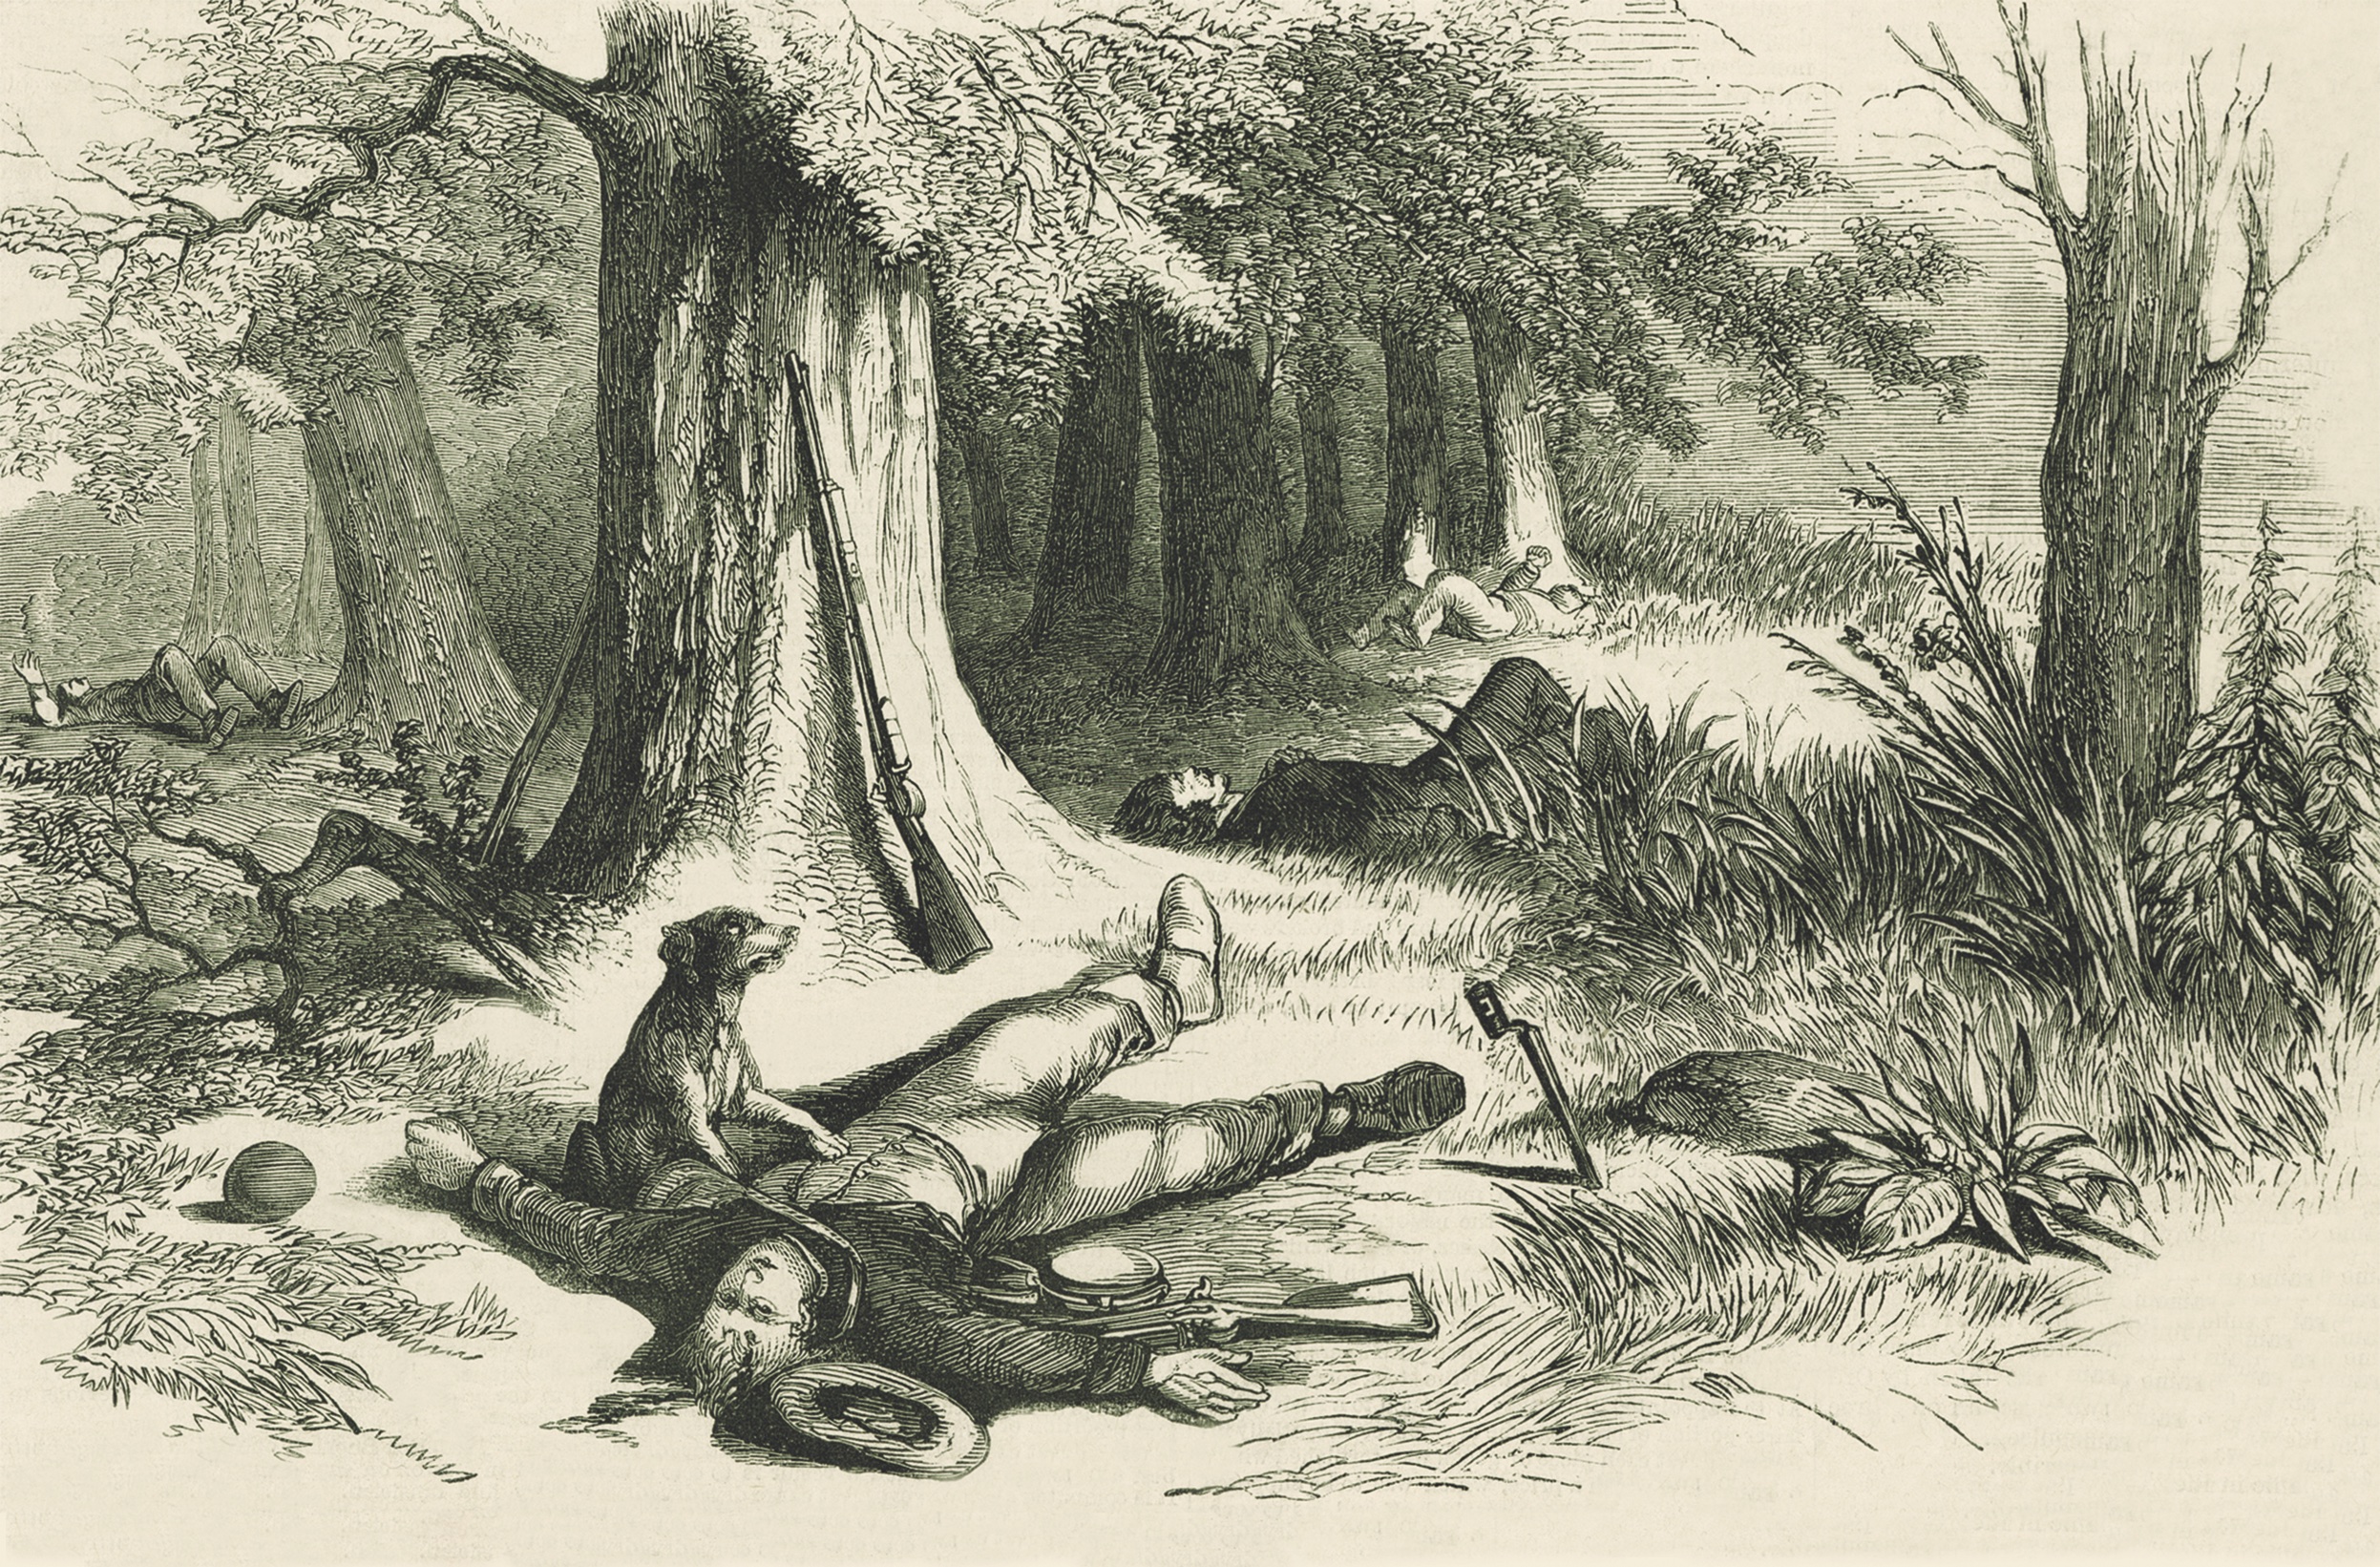 This sketch, which appeared in Frank Leslieâ€™s Illustrated Newspaper, portrays â€œA faithful dog watching and defending the body of his dead rebel master,â€ slain during Sheridanâ€™s 1864 Shenandoah Valley Campaign. (Frank Leslieâ€™s Illustrated Newspaper)